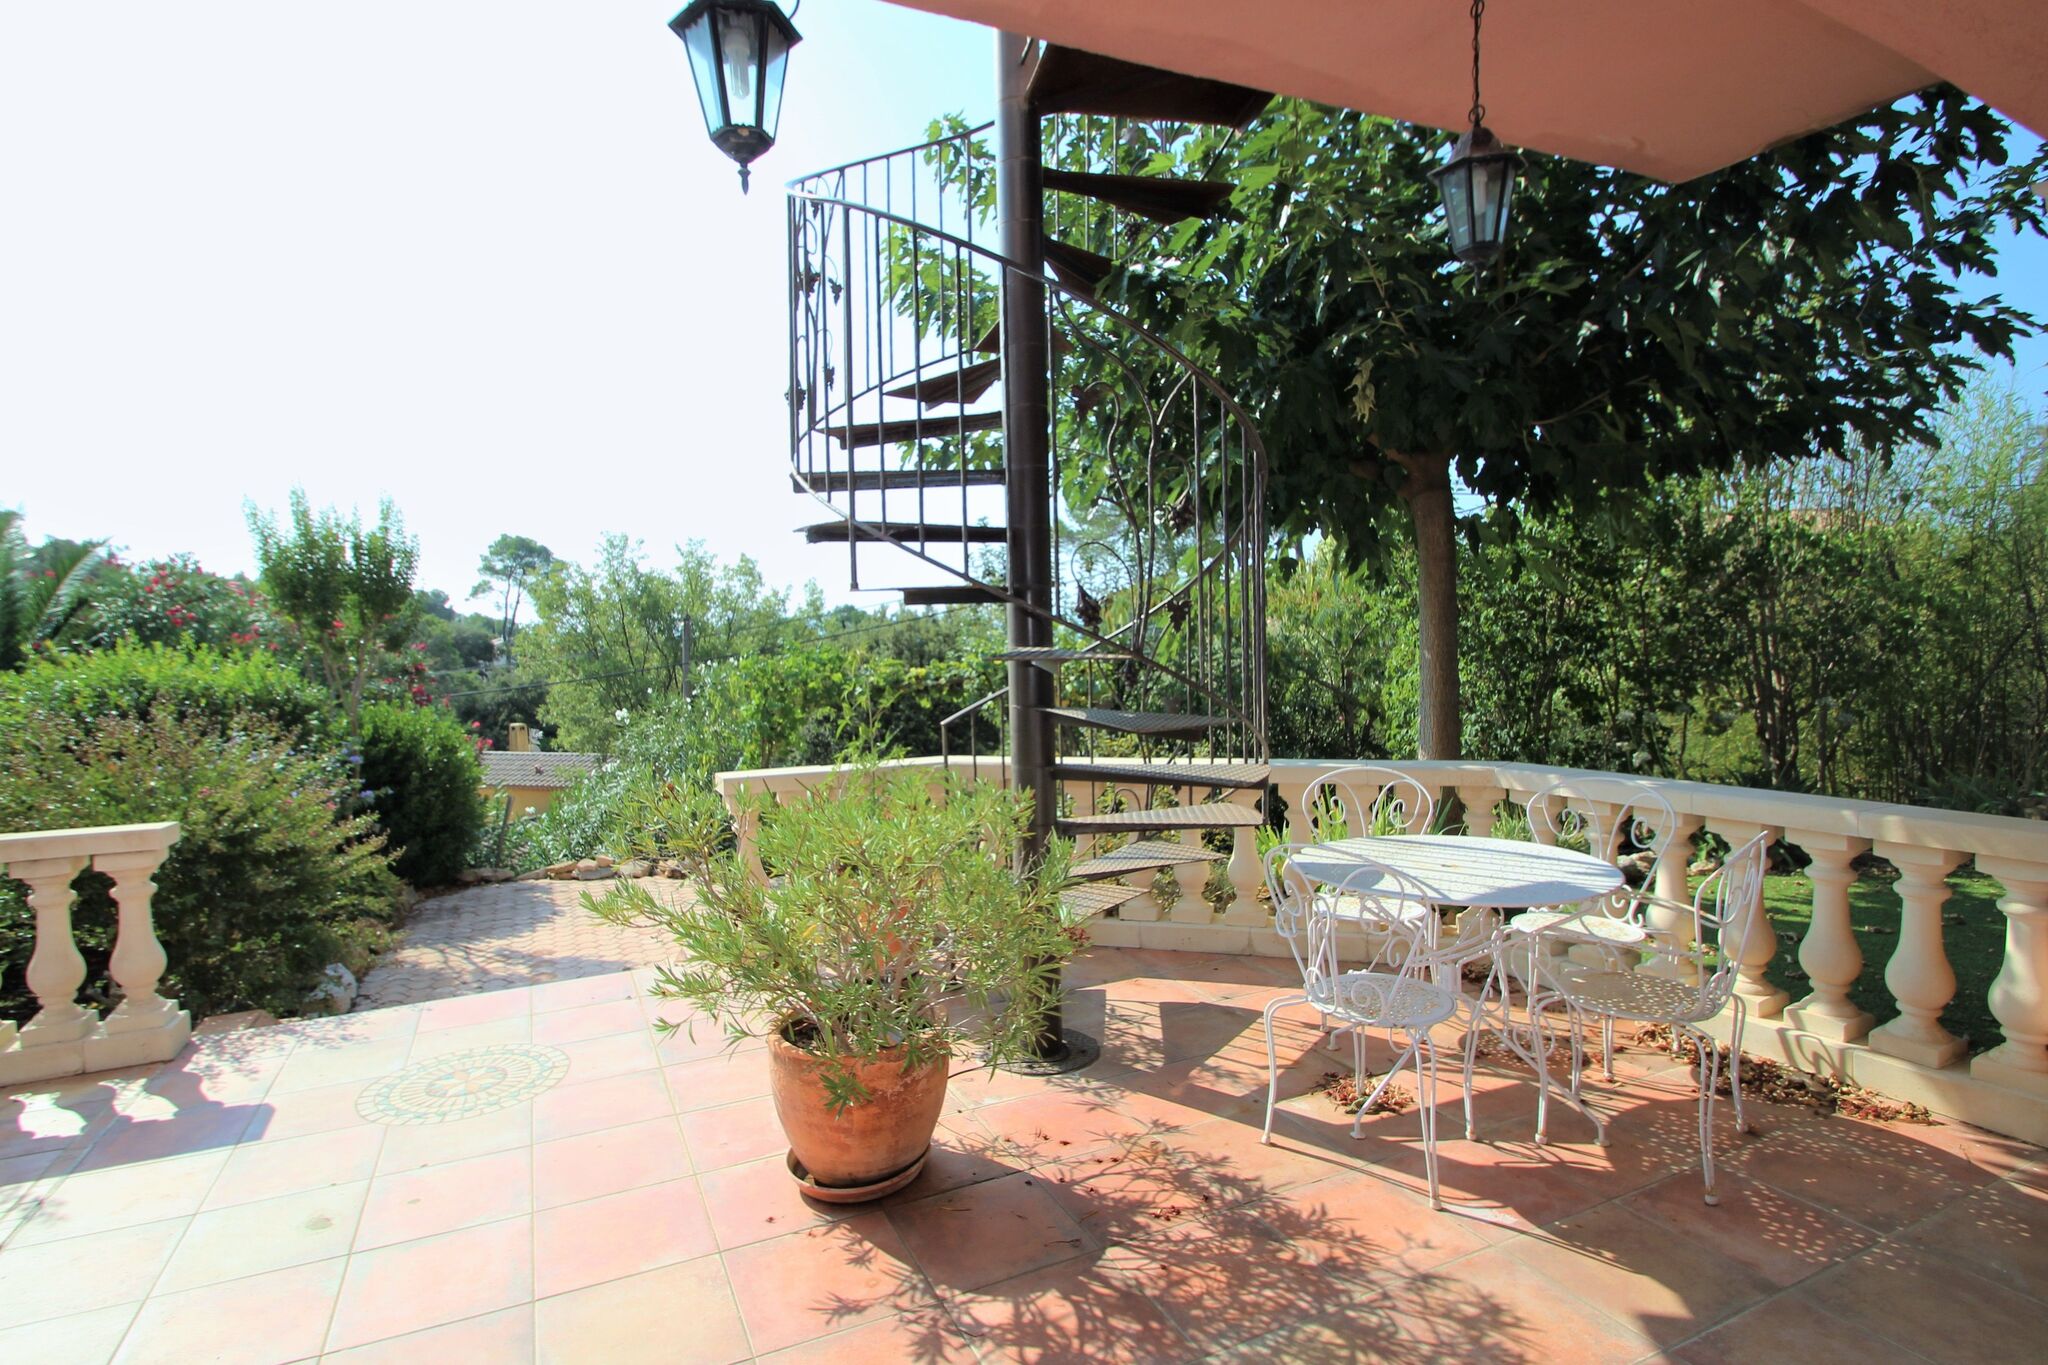 Pleasant holiday home in Lorgues with garden